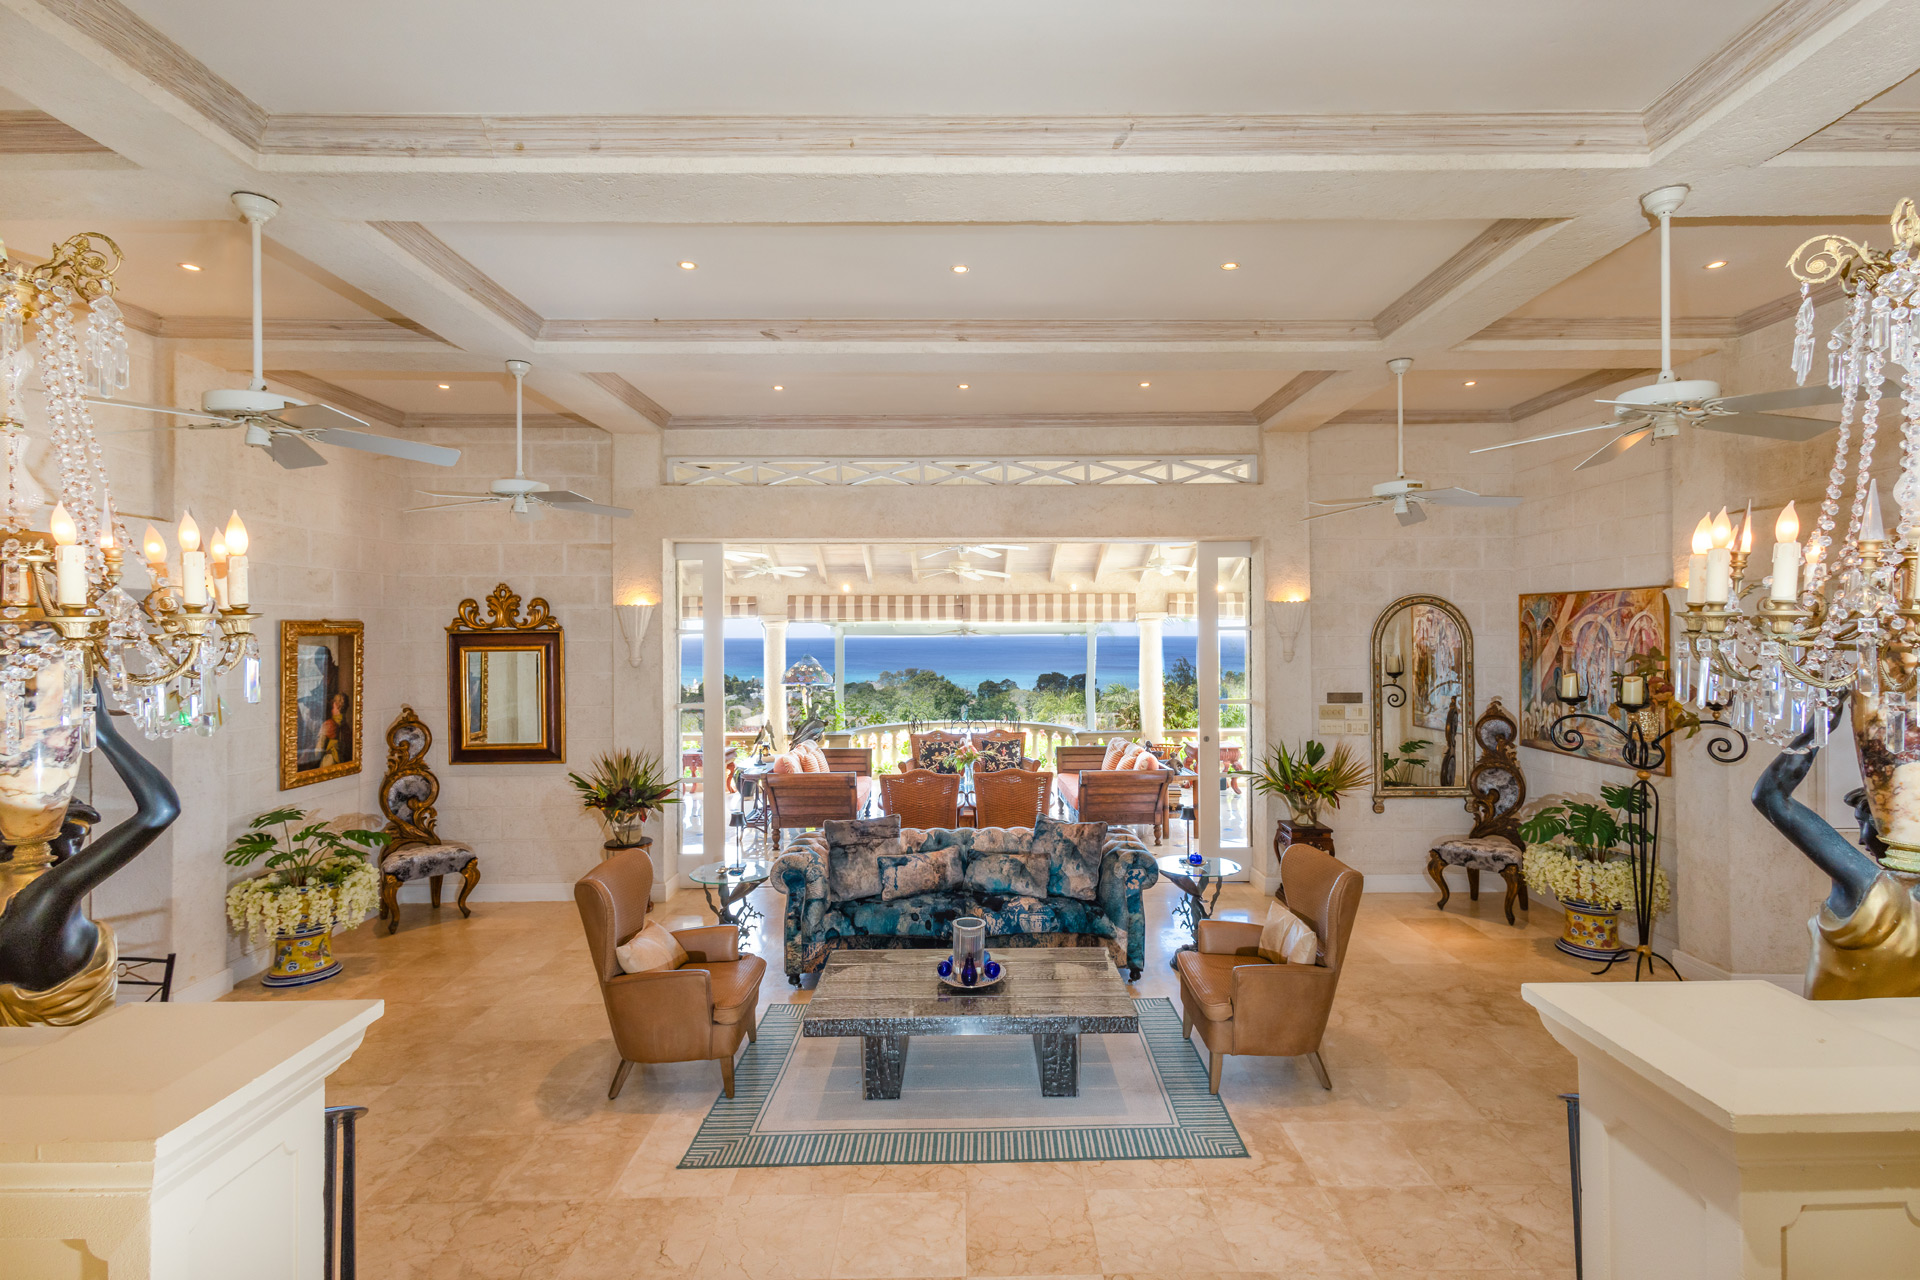 Entrance hall of Barbados villa, with marble floors, high ceilings and views of the Caribbean Sea.